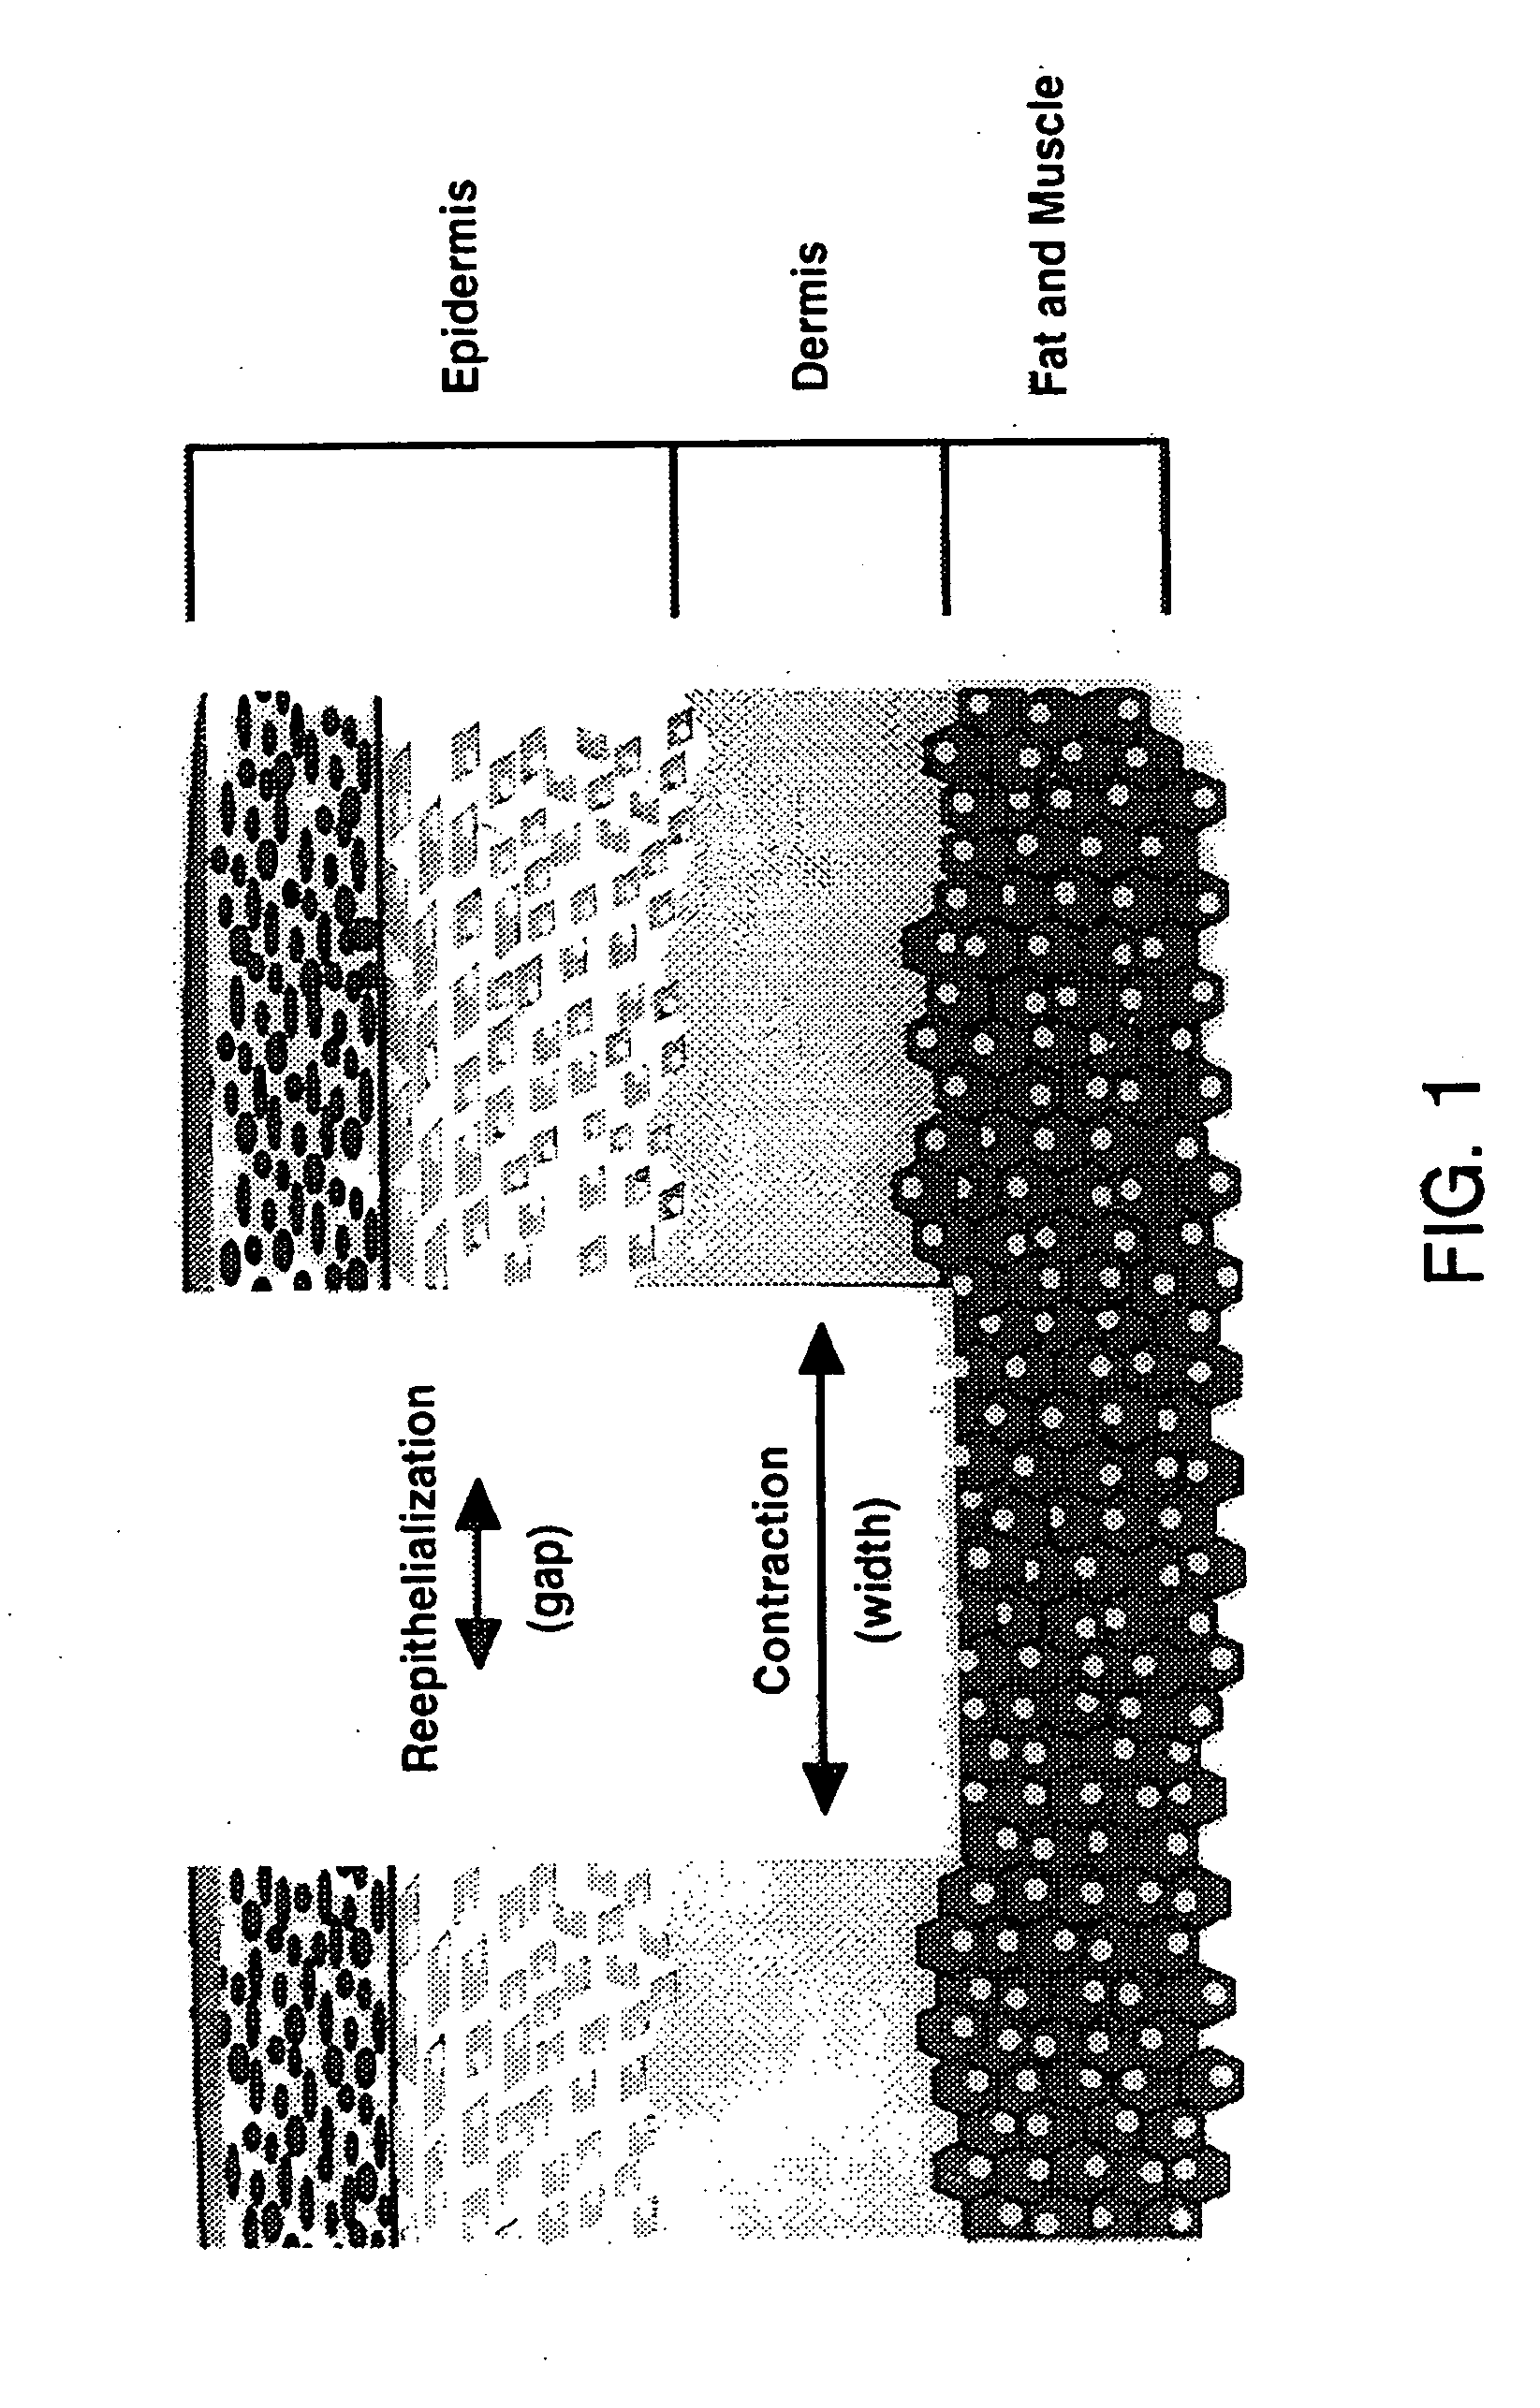 Treatment of skin, and wound repair, with thymosin beta 4